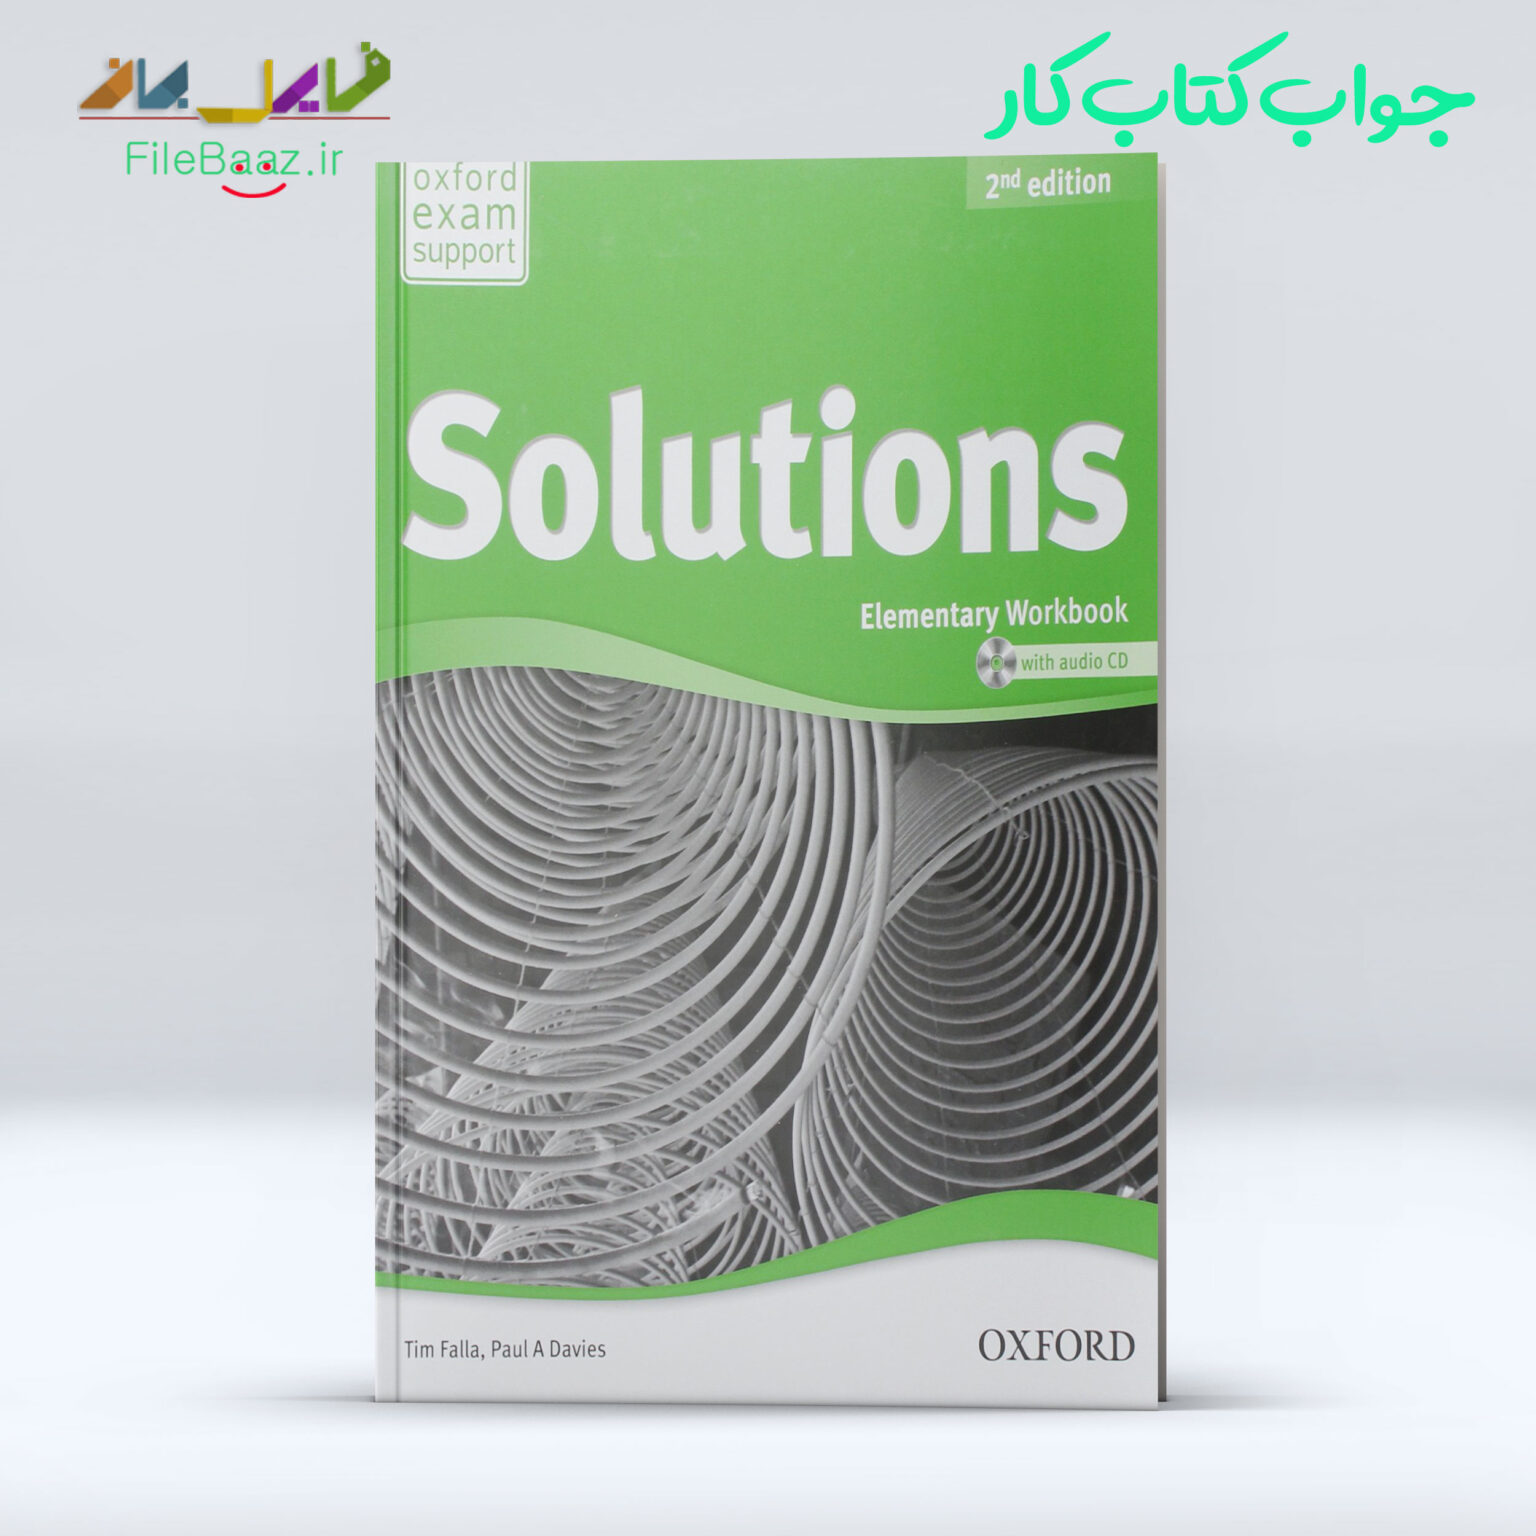 Solutions elementary 2. Third Edition solutions Elementary Workbook. Solutions Elementary Workbook third Edition р 34 гдз.